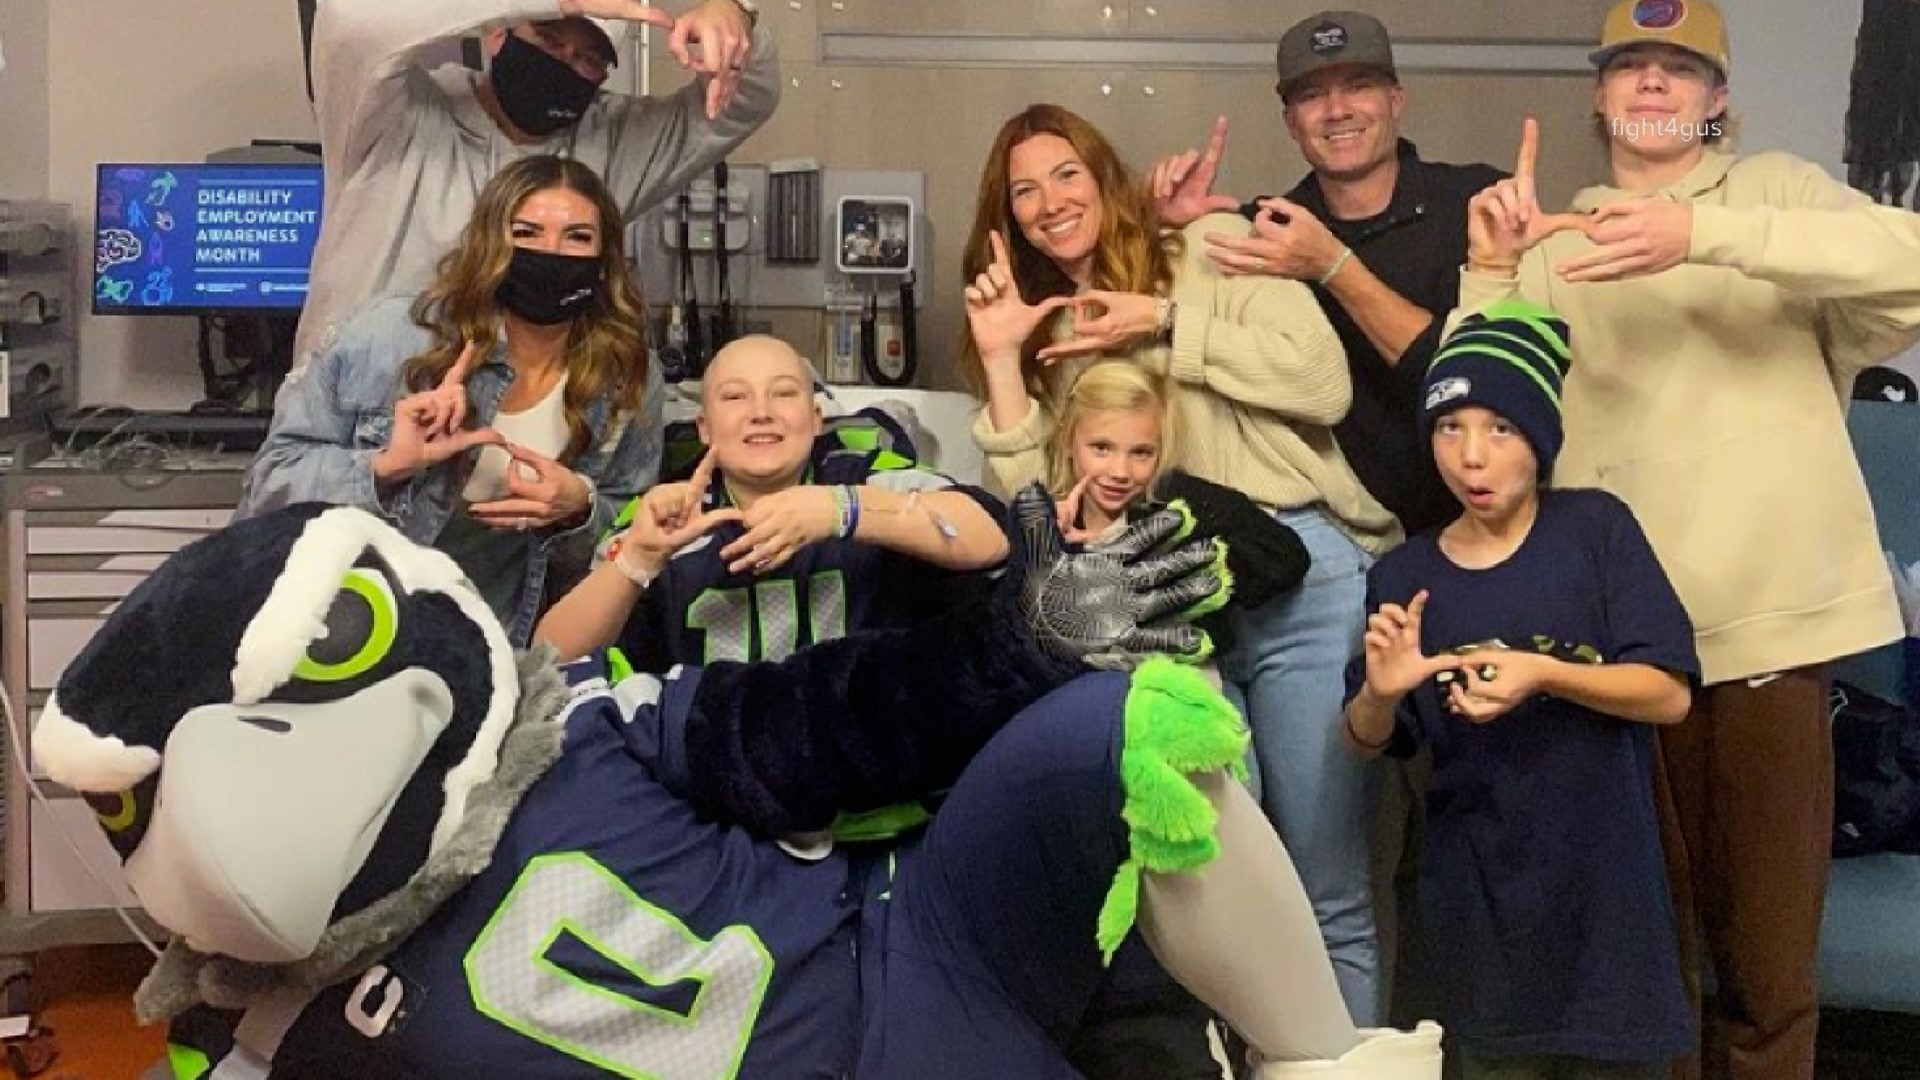 As the Seahawks enter a new season, one of the team's biggest fans is also starting a new chapter in his recovery from Leukemia.